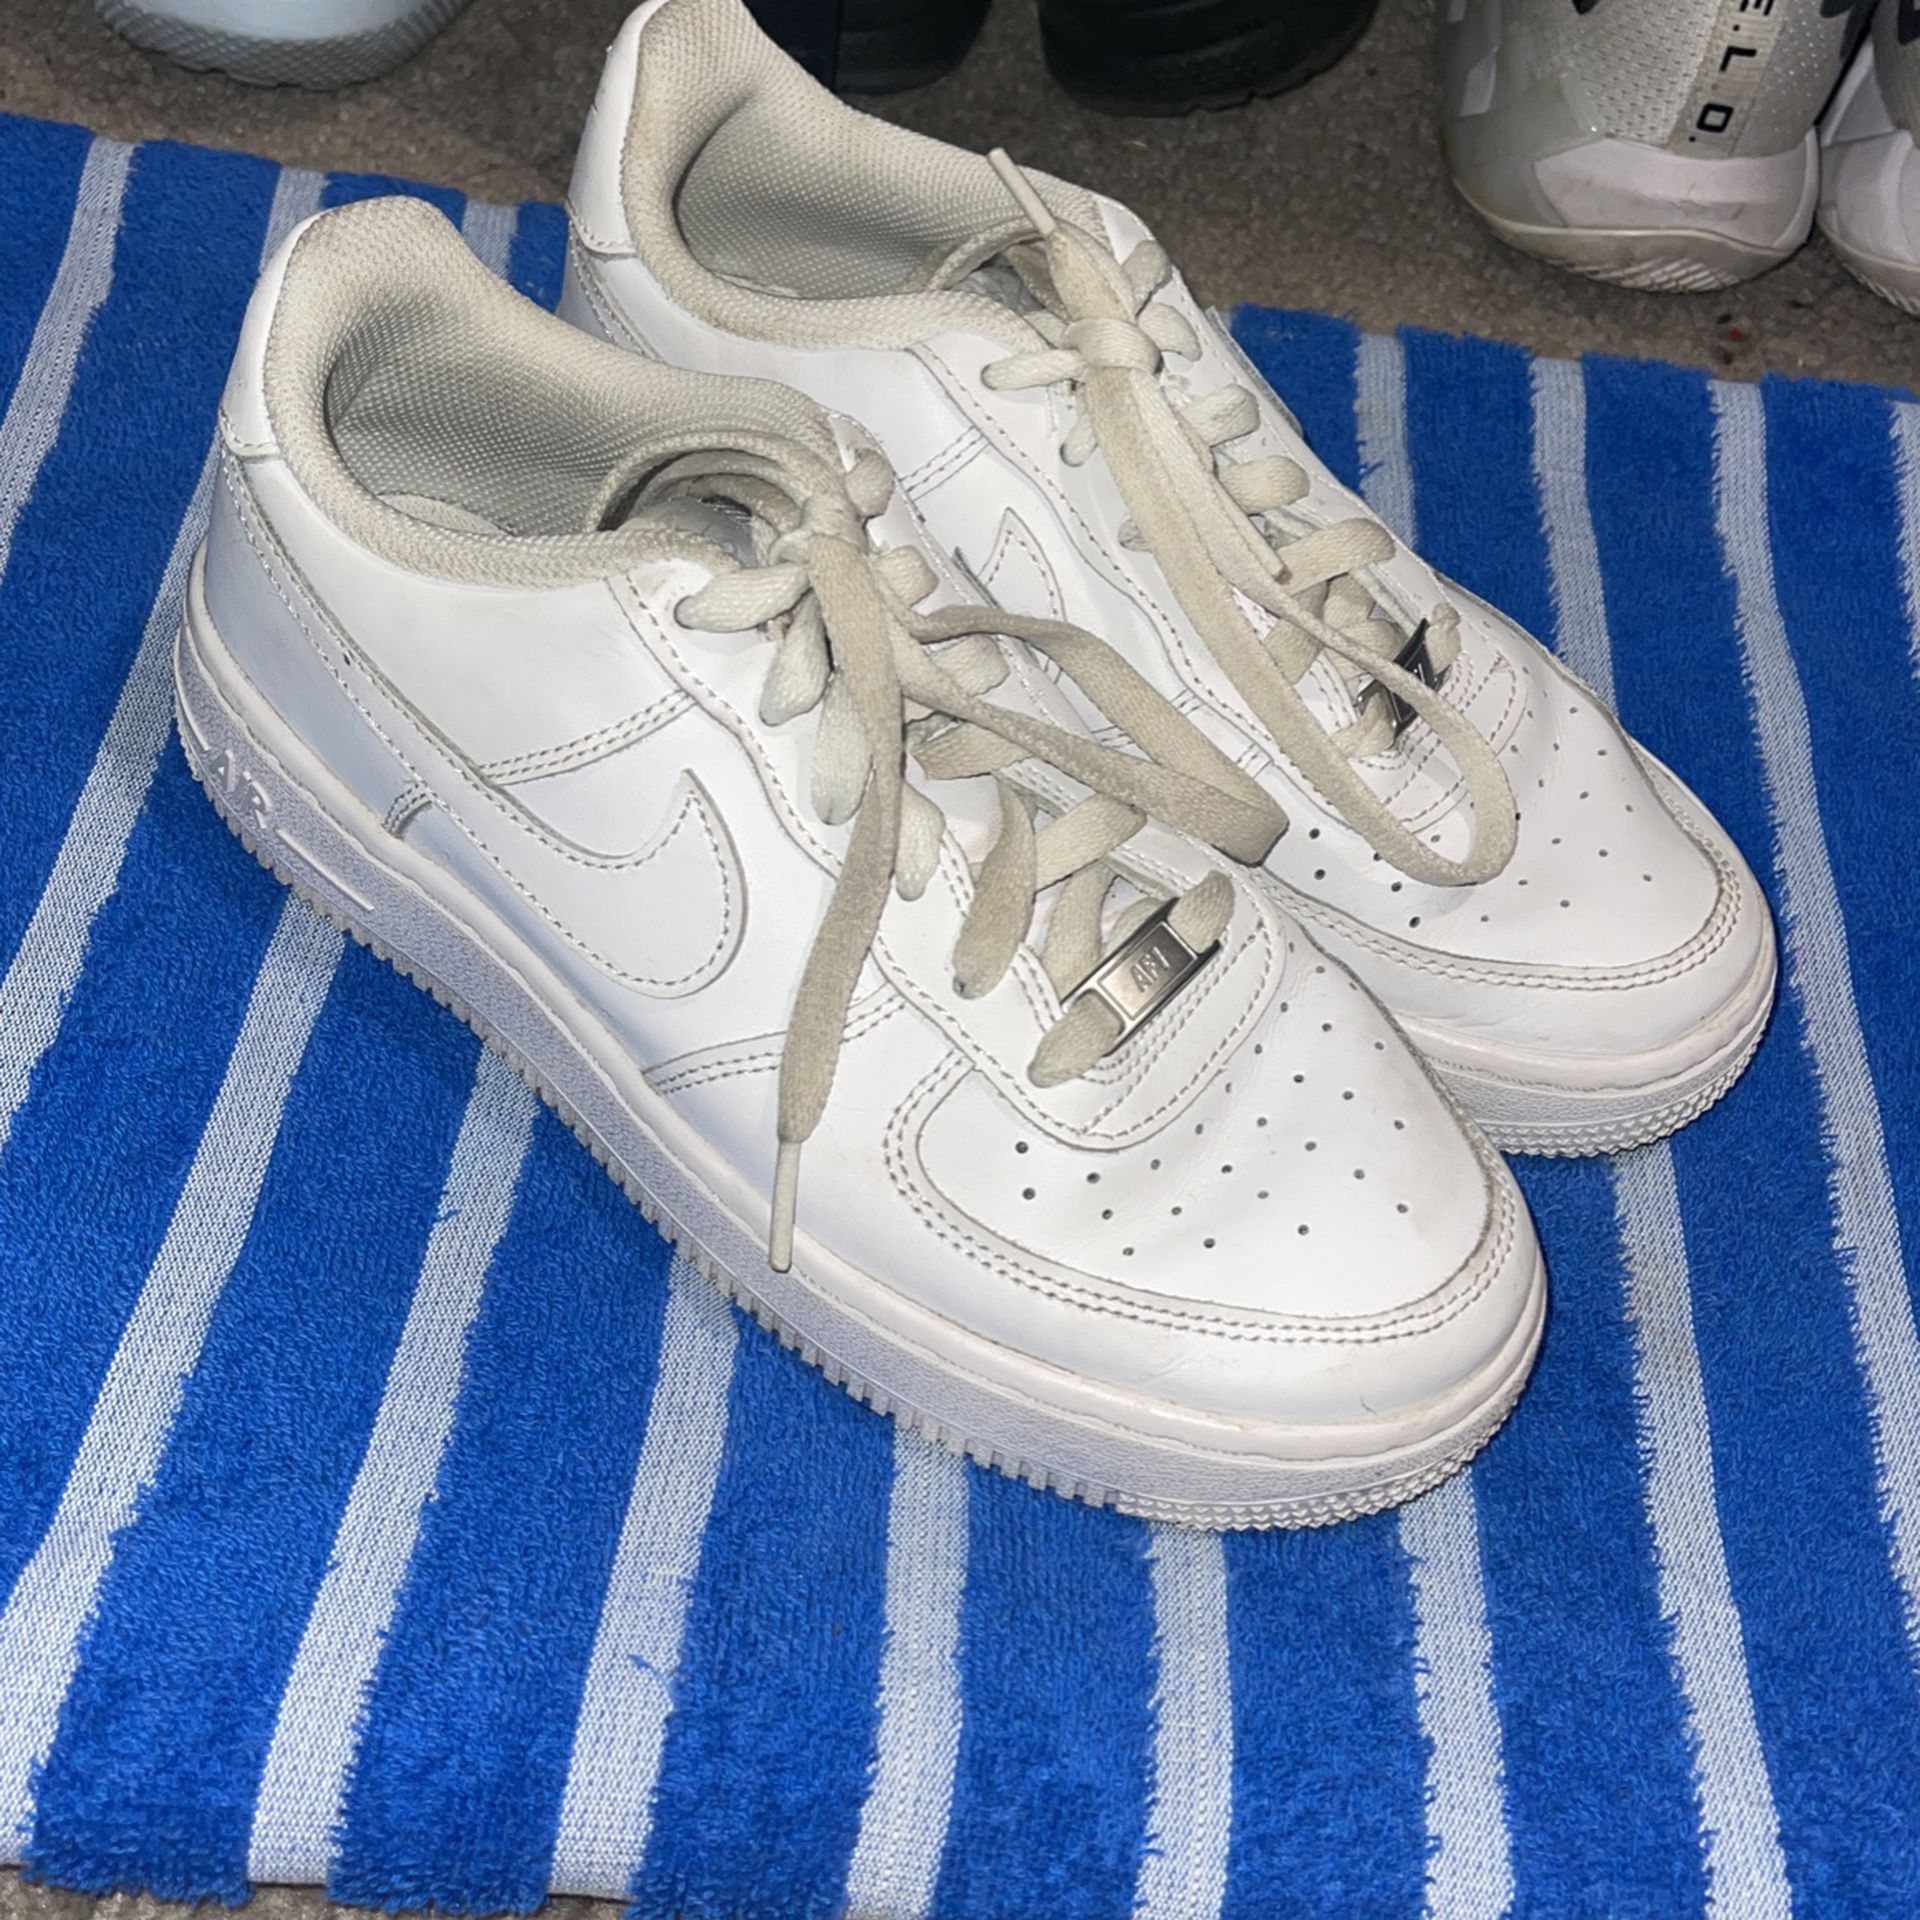 Nike Air Force Ones Size 5.5Y